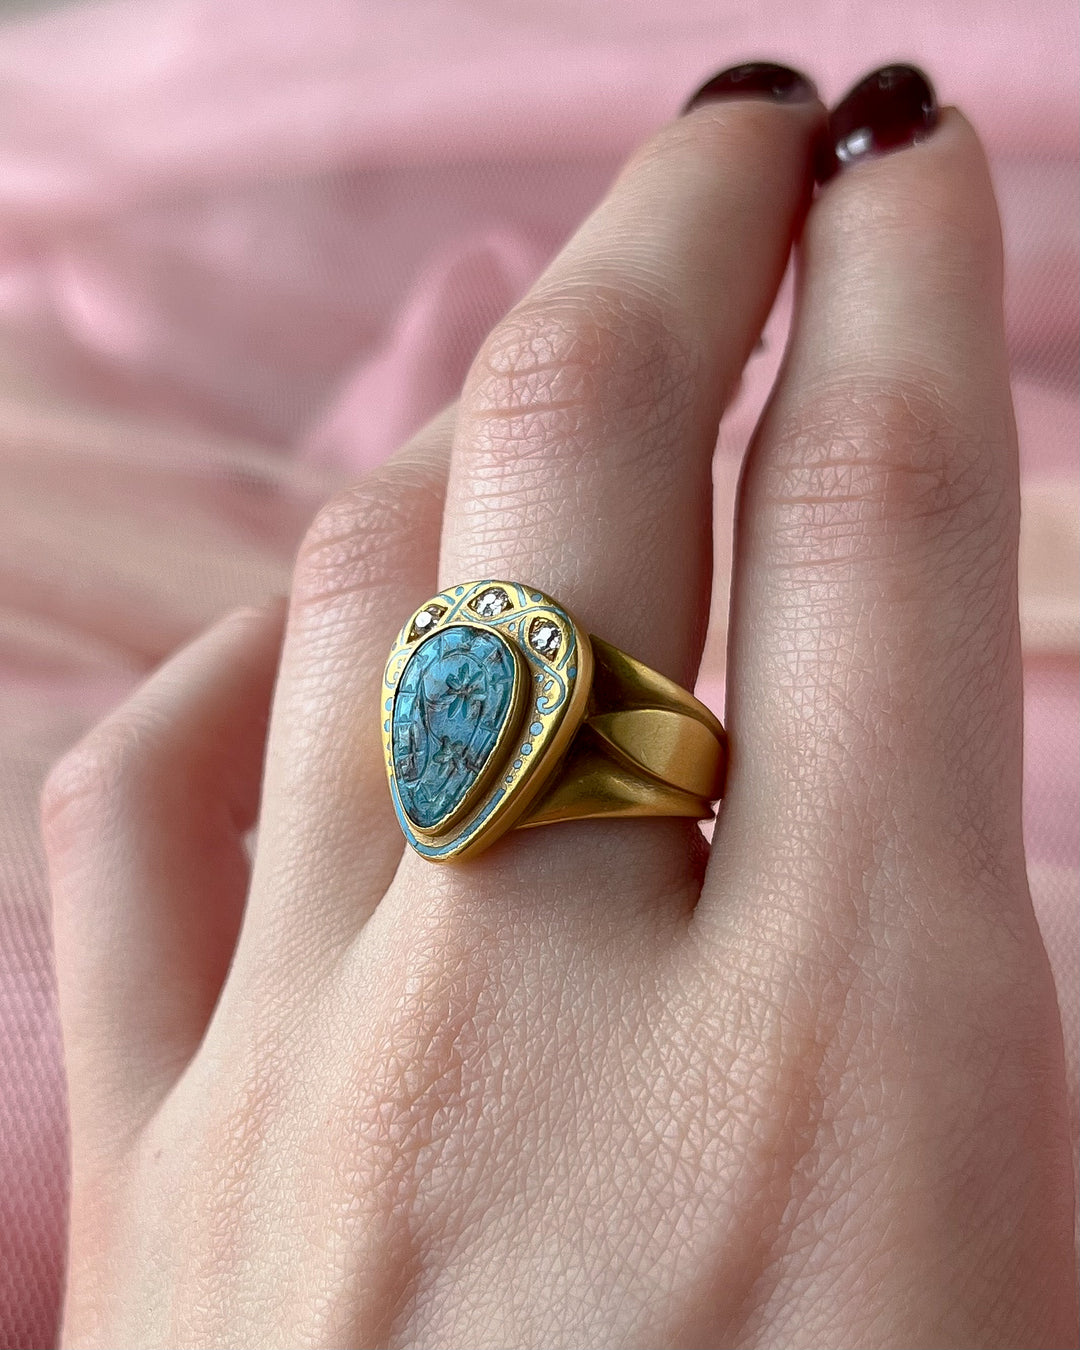 Stunning French Egyptian Revival Art Nouveau Turquoise Signet Ring